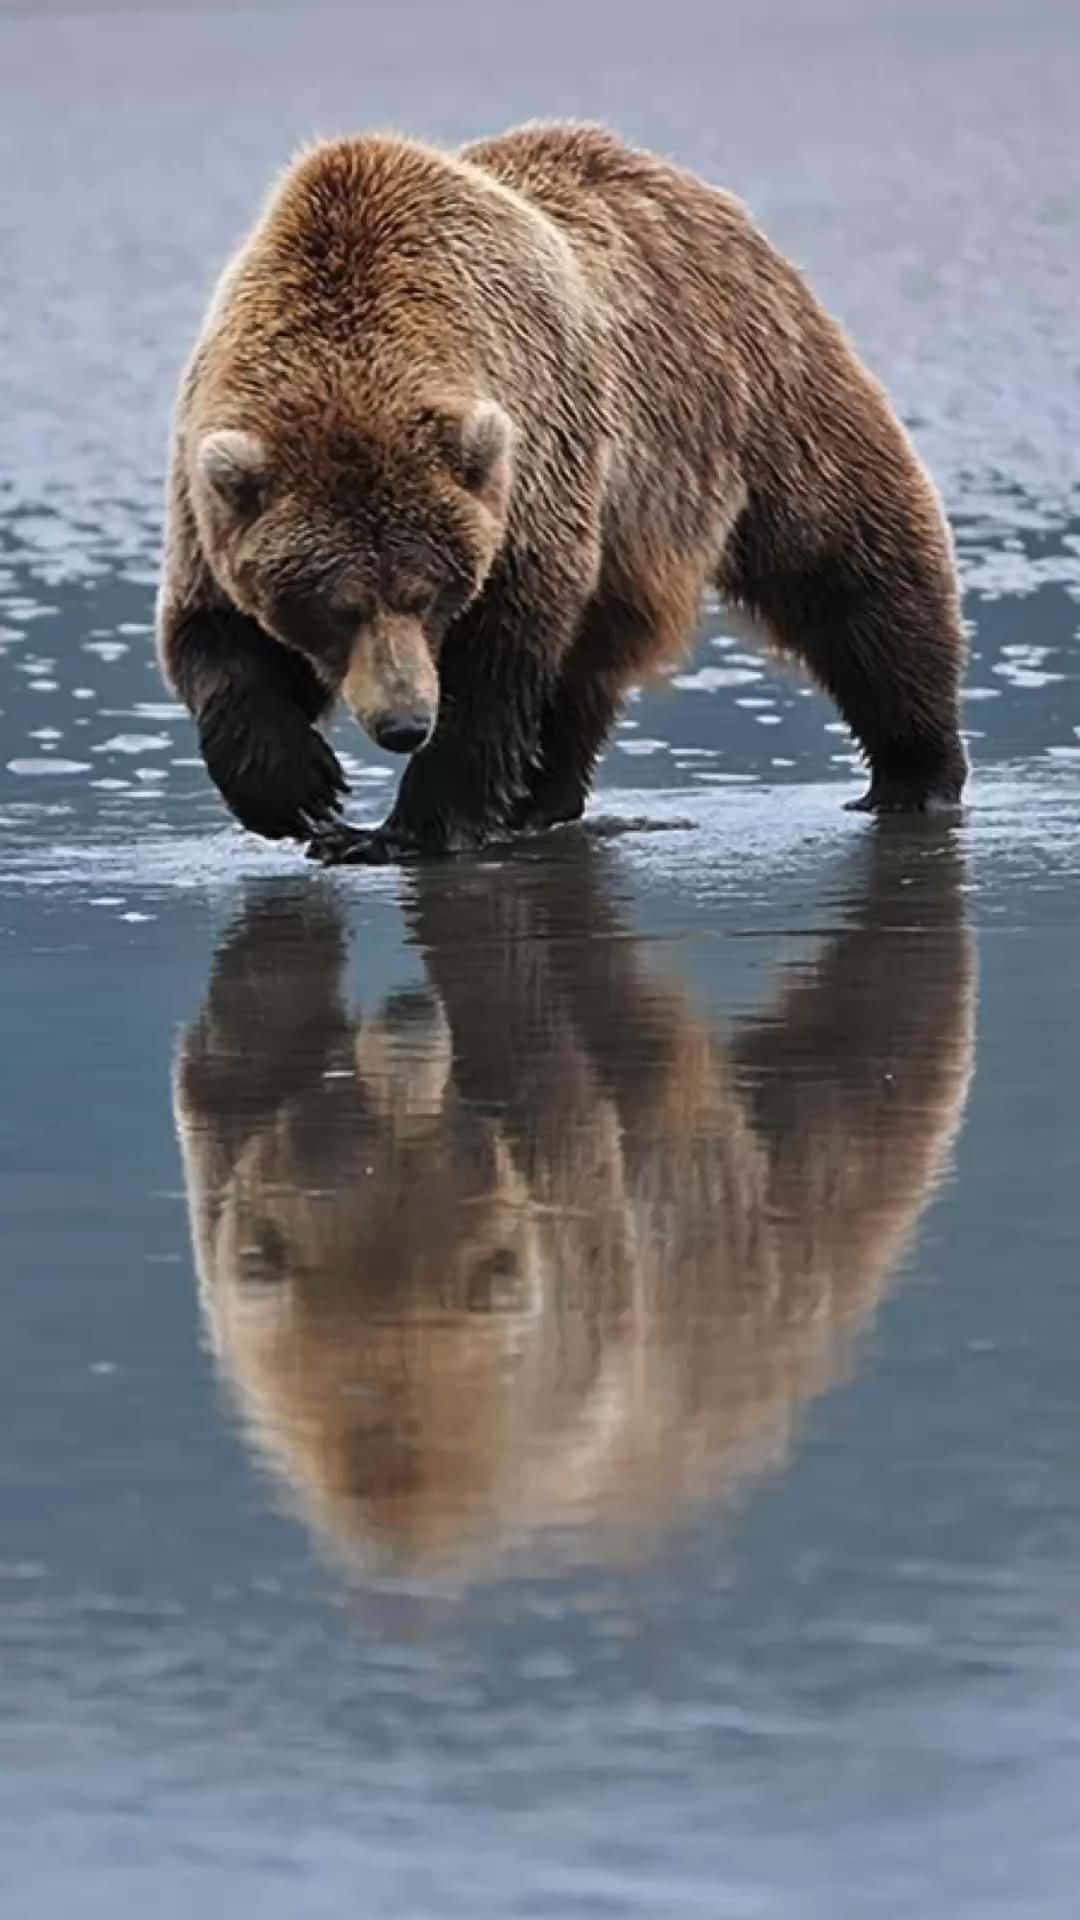 A Brown Bear Is Walking In The Water With Its Reflection